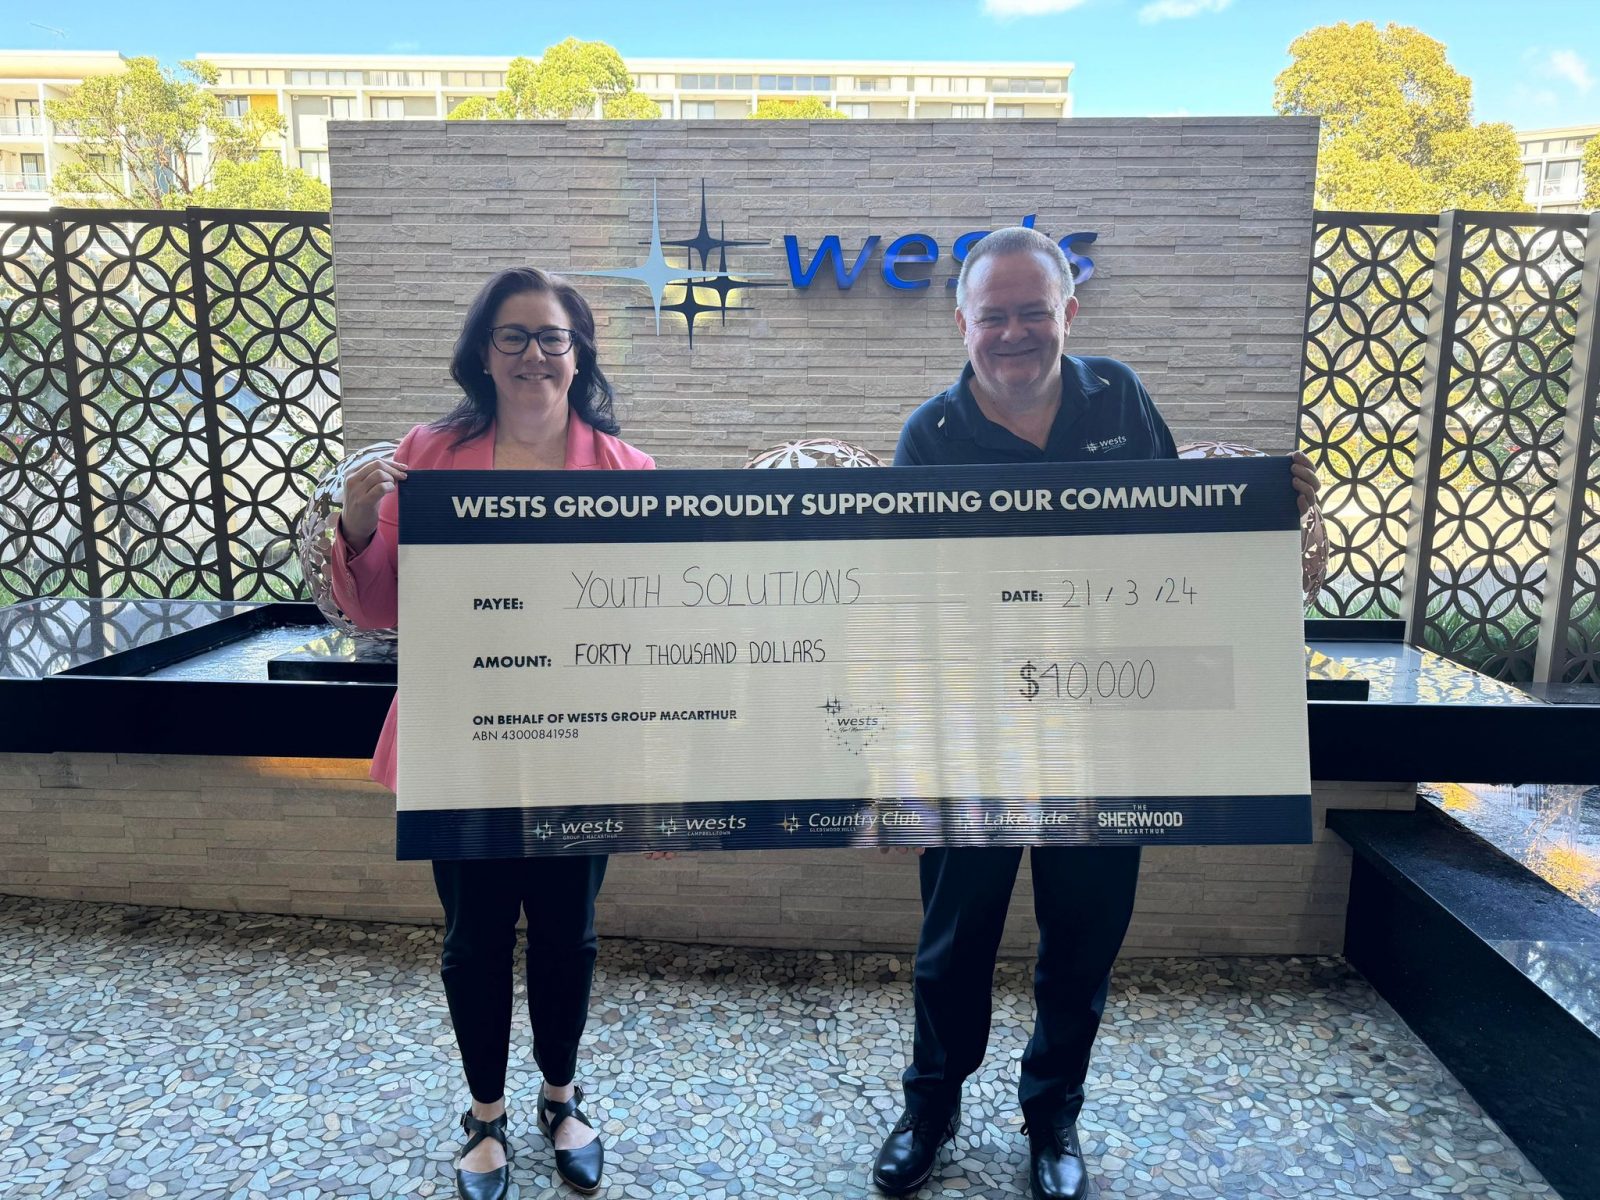 Youth Solutions CEO Geraldine Dean receives a cheque for $40,000 from Wests Group Macarthur Director Stephen Stewart for the Sports AWARE Project.